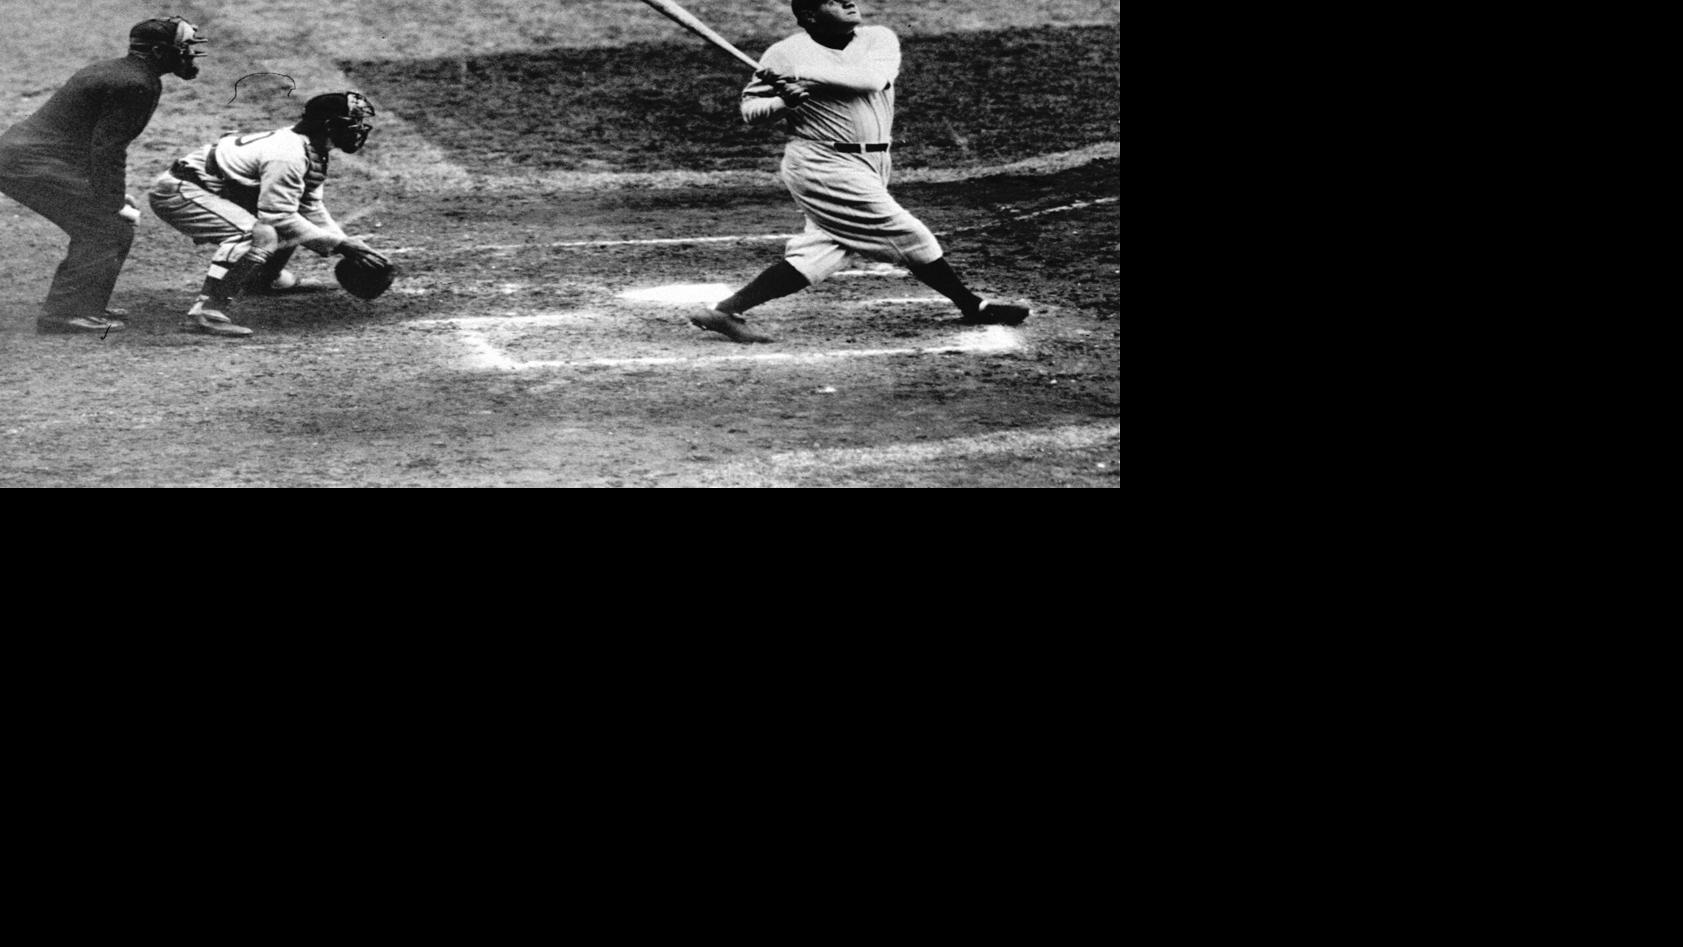 Today In Sports History Babe Ruth Hits Record 60th Home Run During